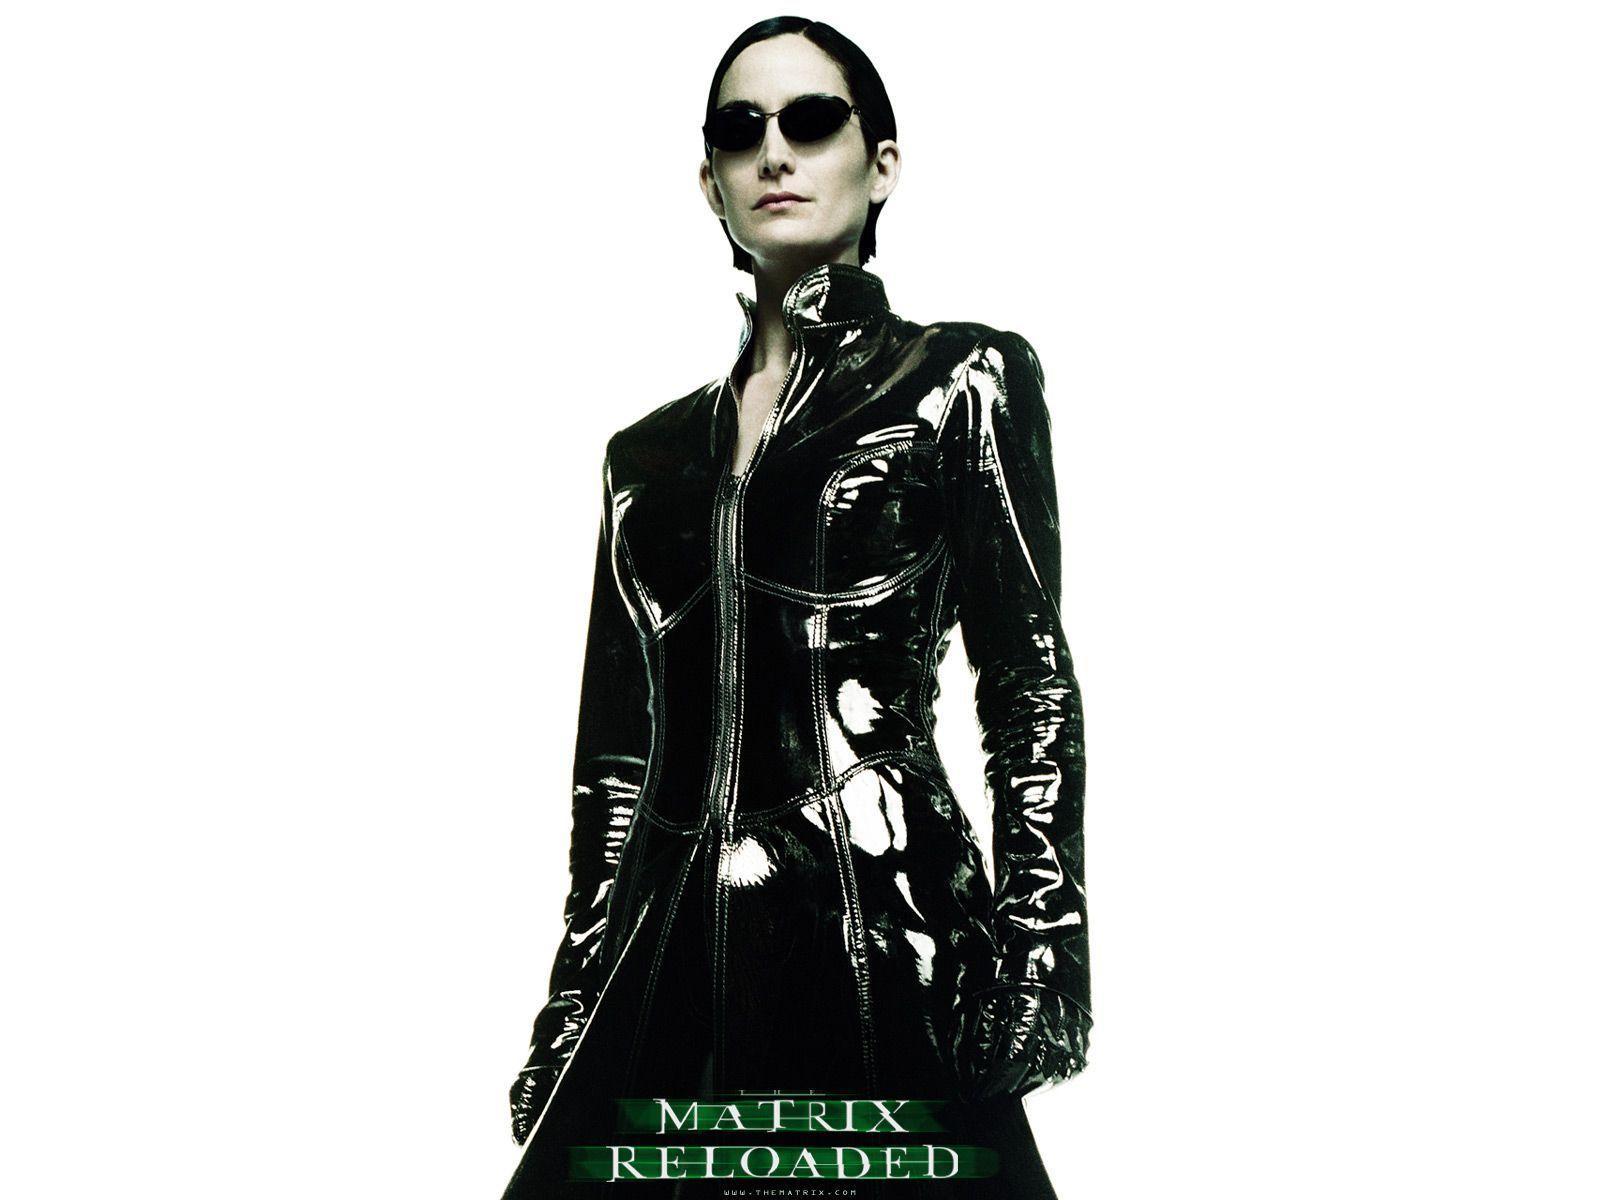 The Matrix Reloaded HD Wallpaper. Download High Quality